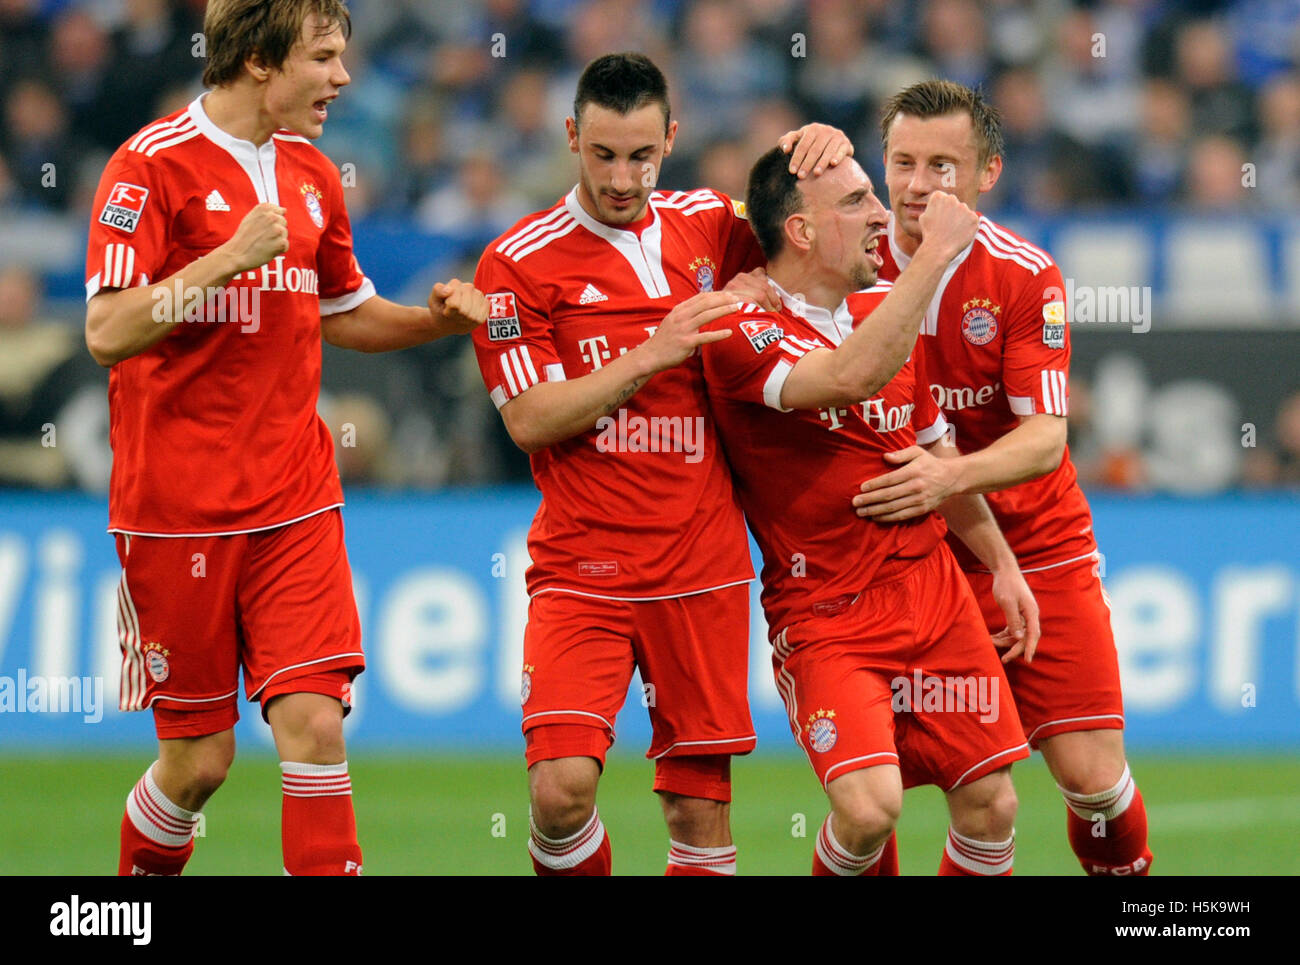 Franck Ribery cheering after his goal 0-1, from left: Holger Badstuber, Diego Contento, Franck Ribery and Ivica Olic, FC Schalke Stock Photo